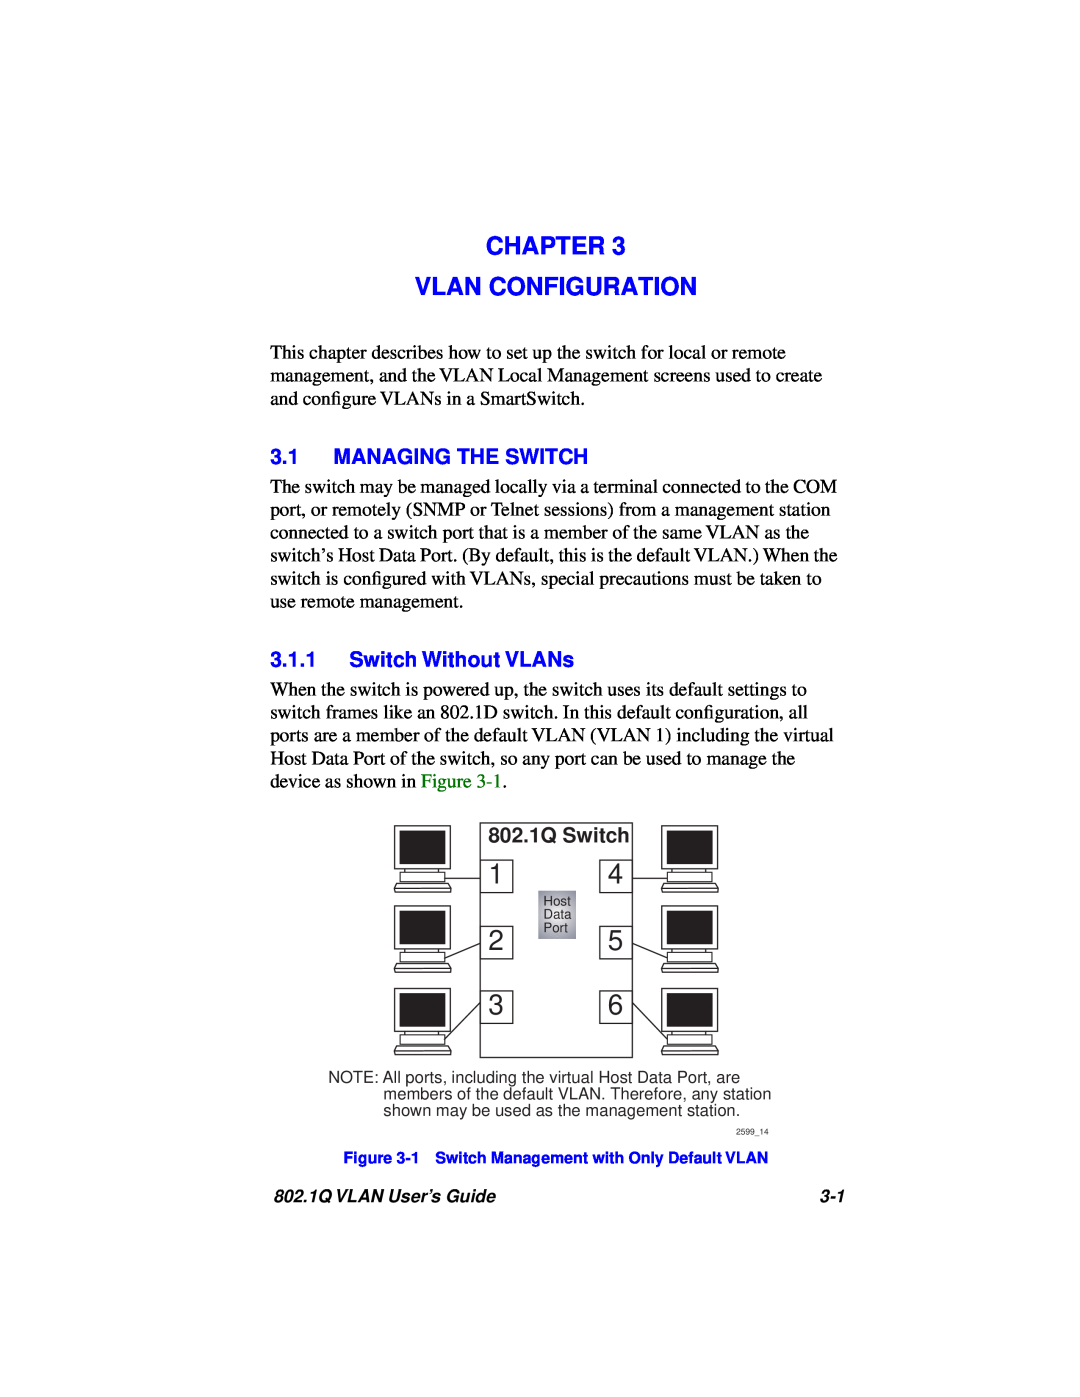 Cabletron Systems manual Chapter Vlan Configuration, Managing The Switch, Switch Without VLANs, 802.1Q Switch 